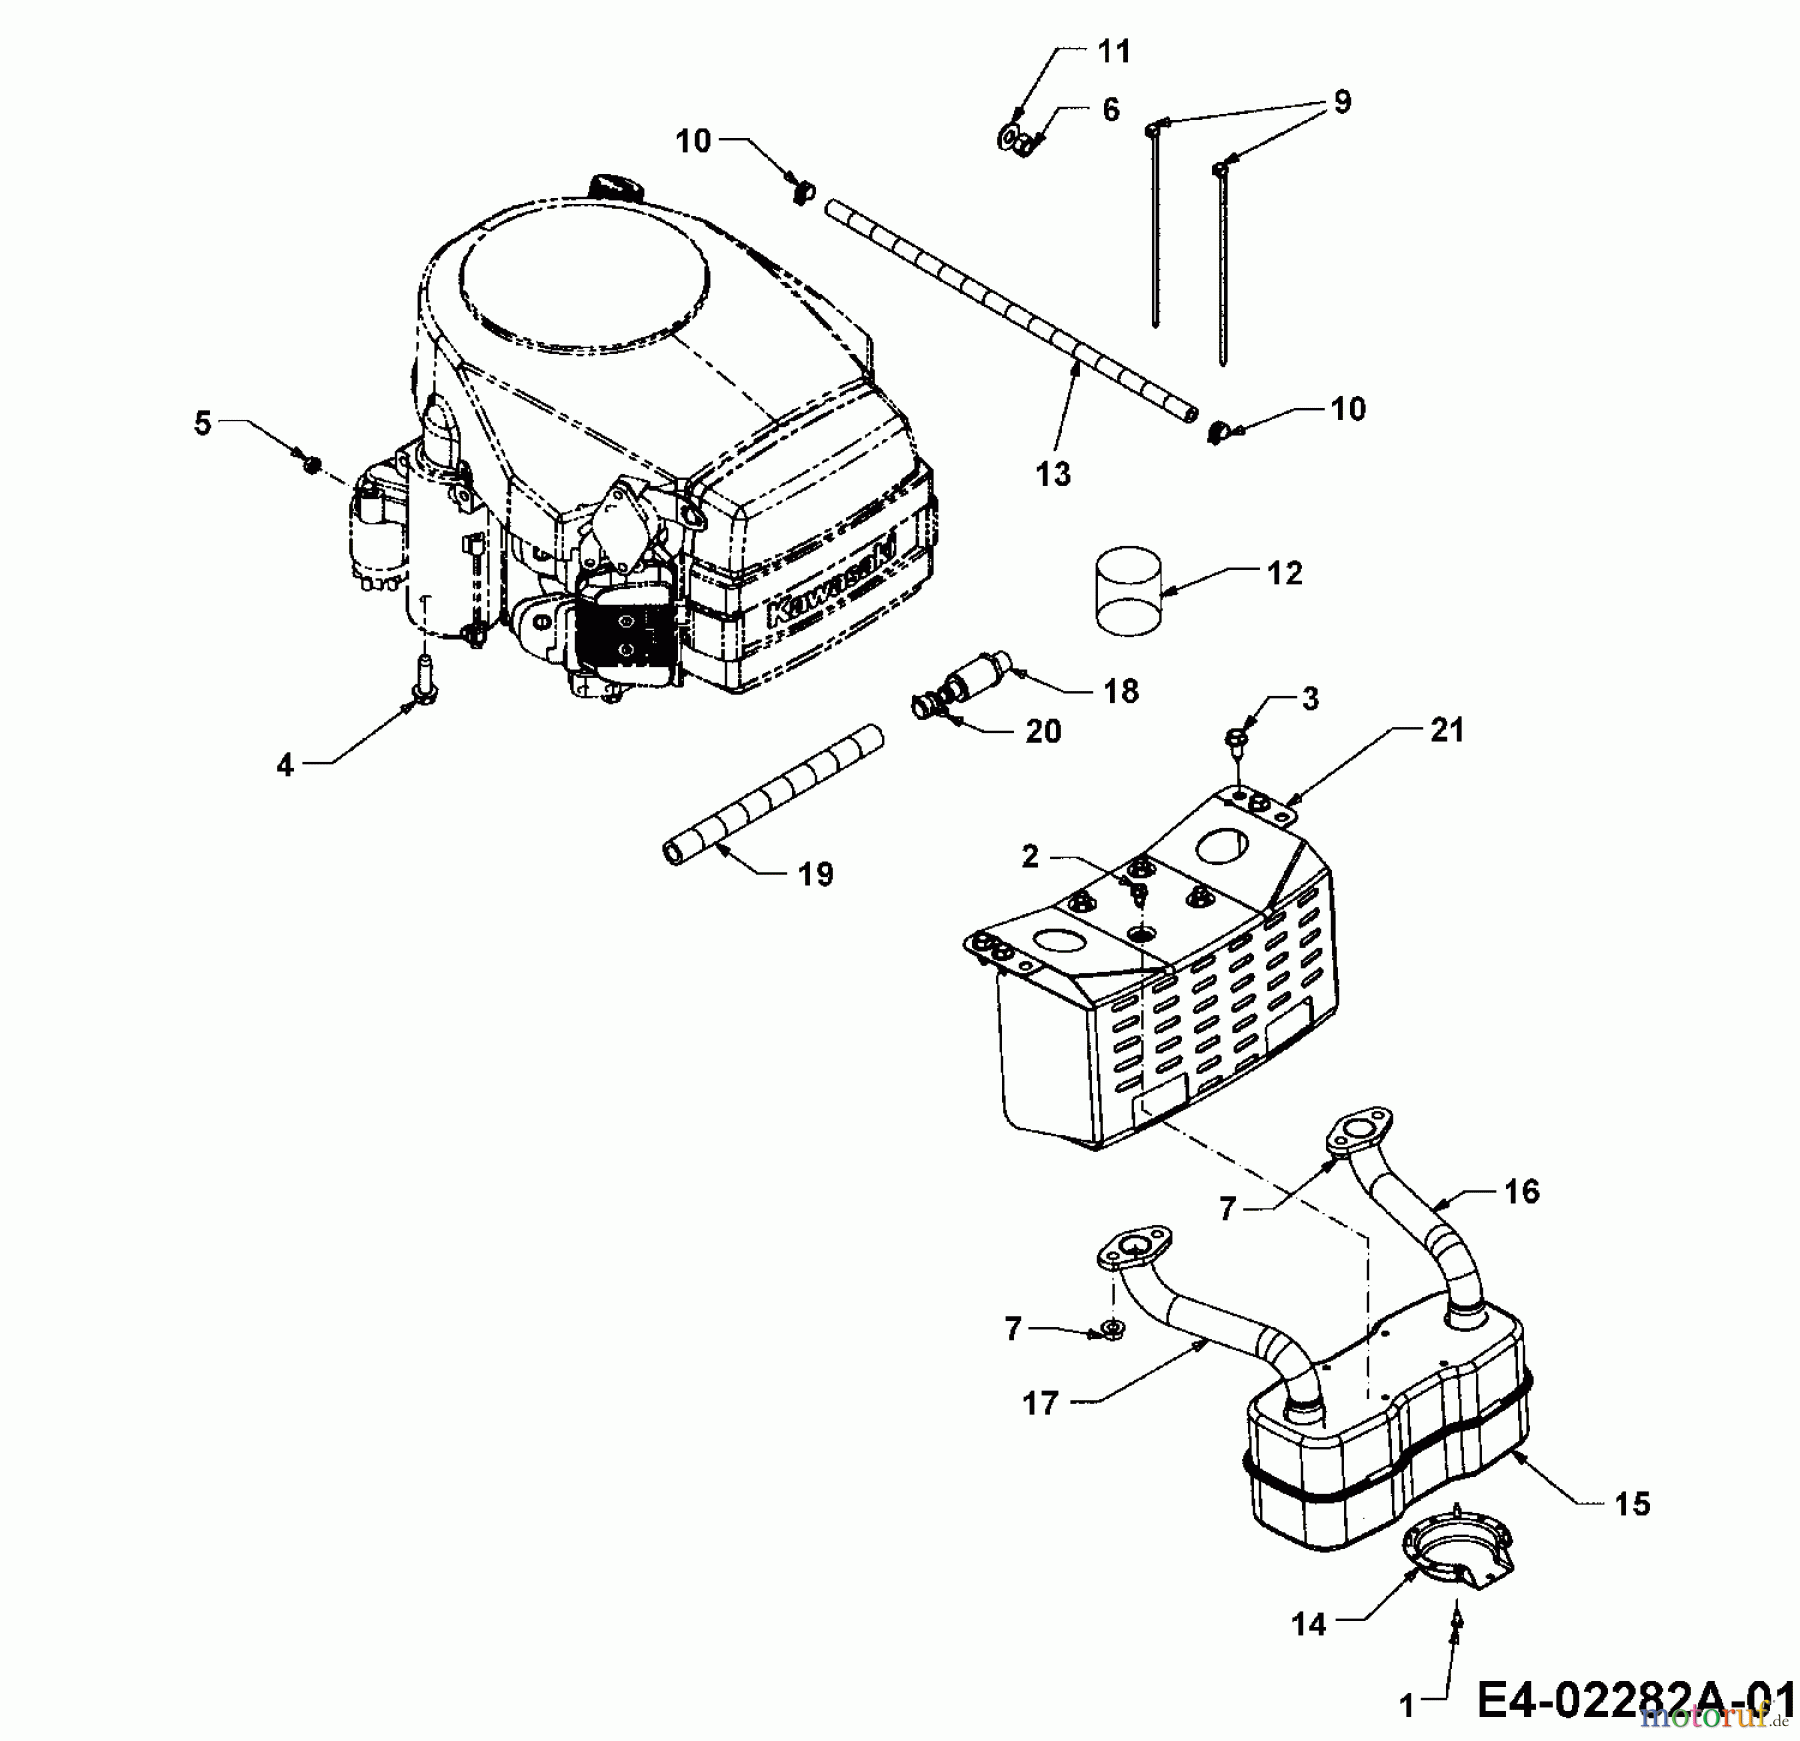  Cub Cadet Lawn tractors CC 1527 13A-241G603  (2003) Engine accessories from 11.12.2002